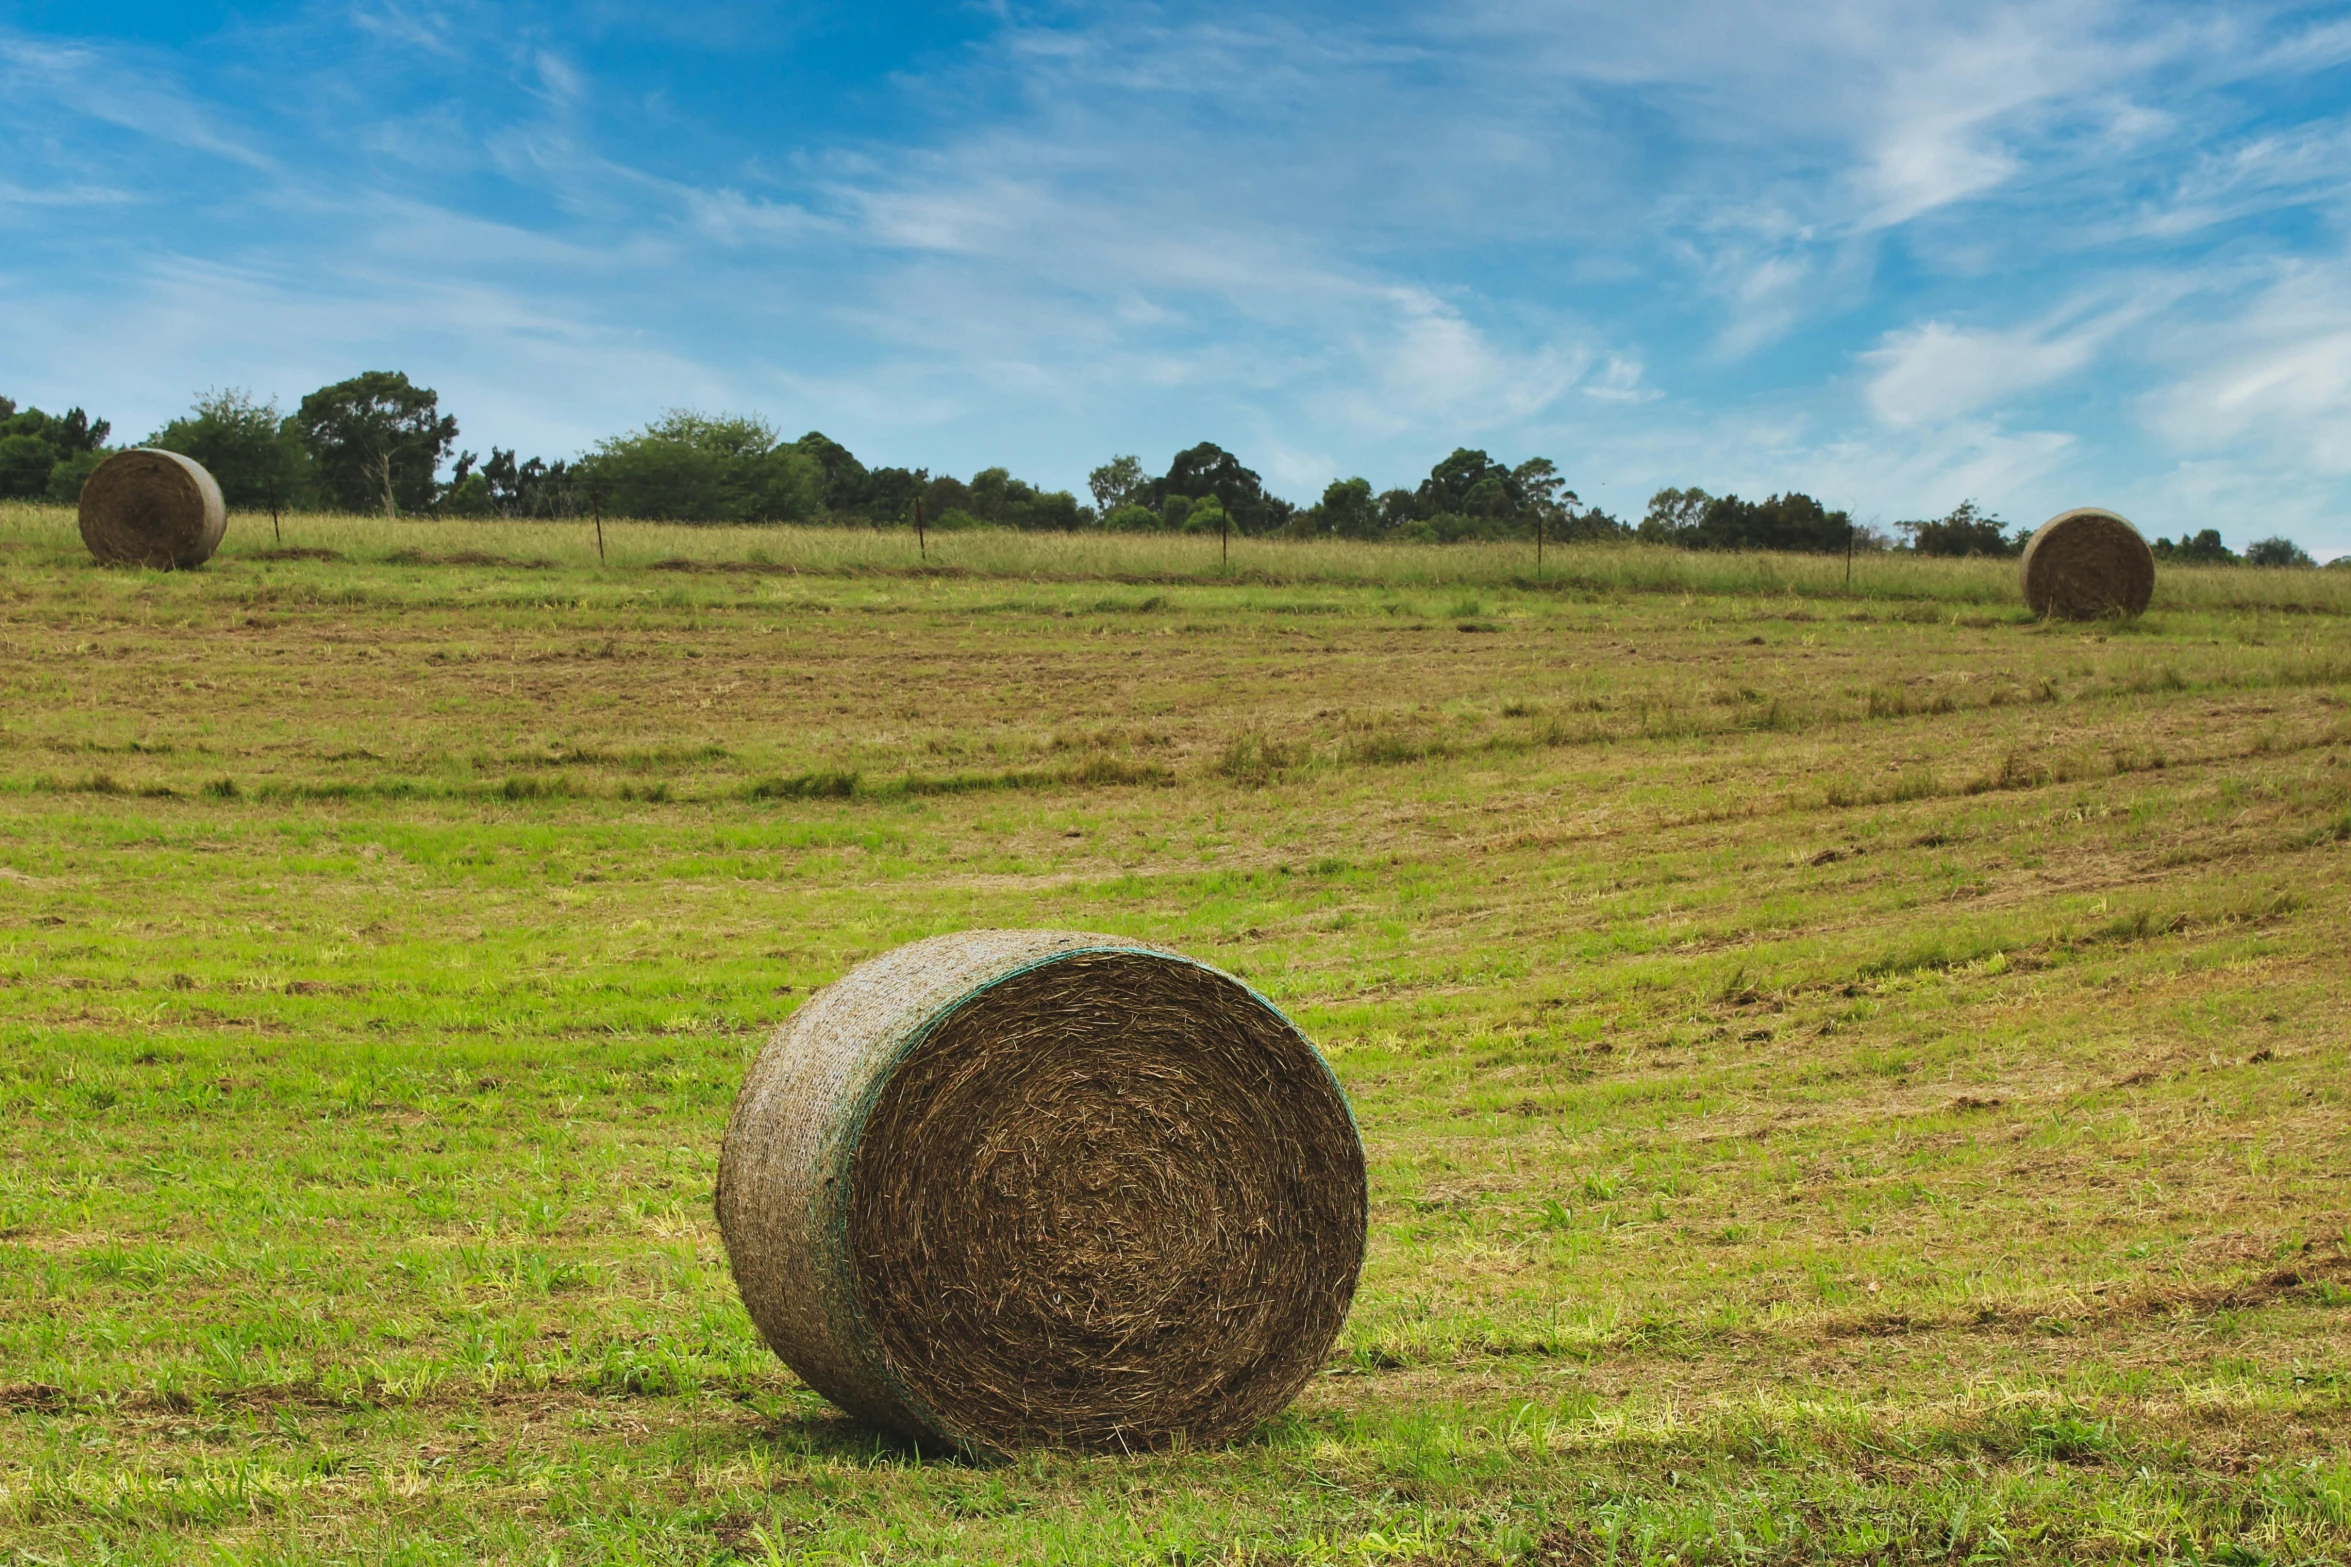 several round bales of hay are in an open field